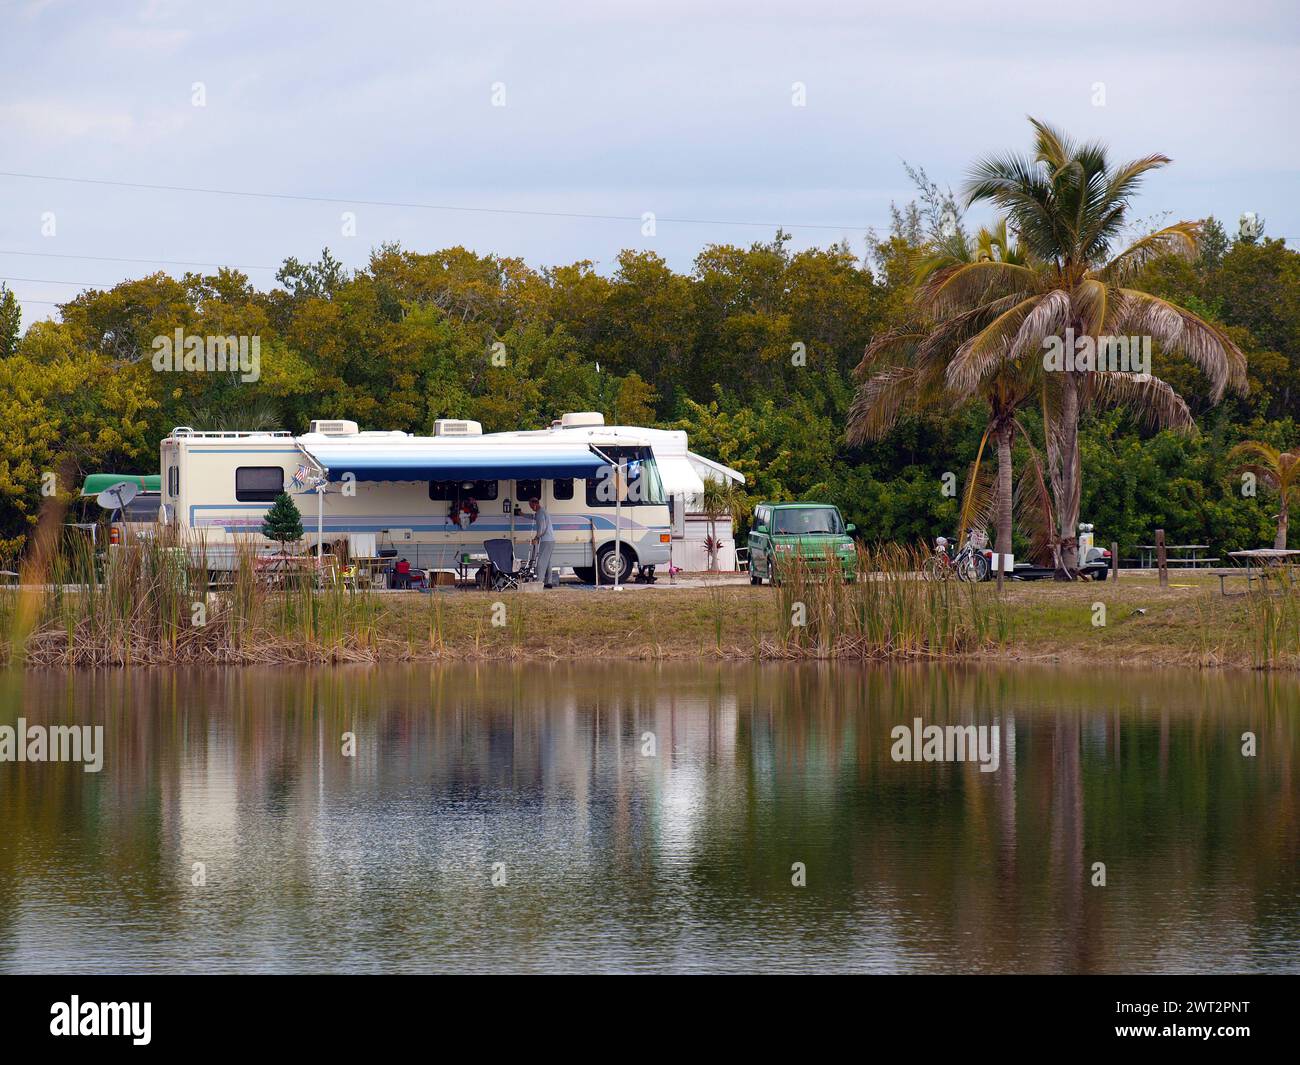 Pine Island, Florida, United States - October 09, 2012: Motorhome in the campground of the Pine Island KOA (Kampgrounds of America). Stock Photo